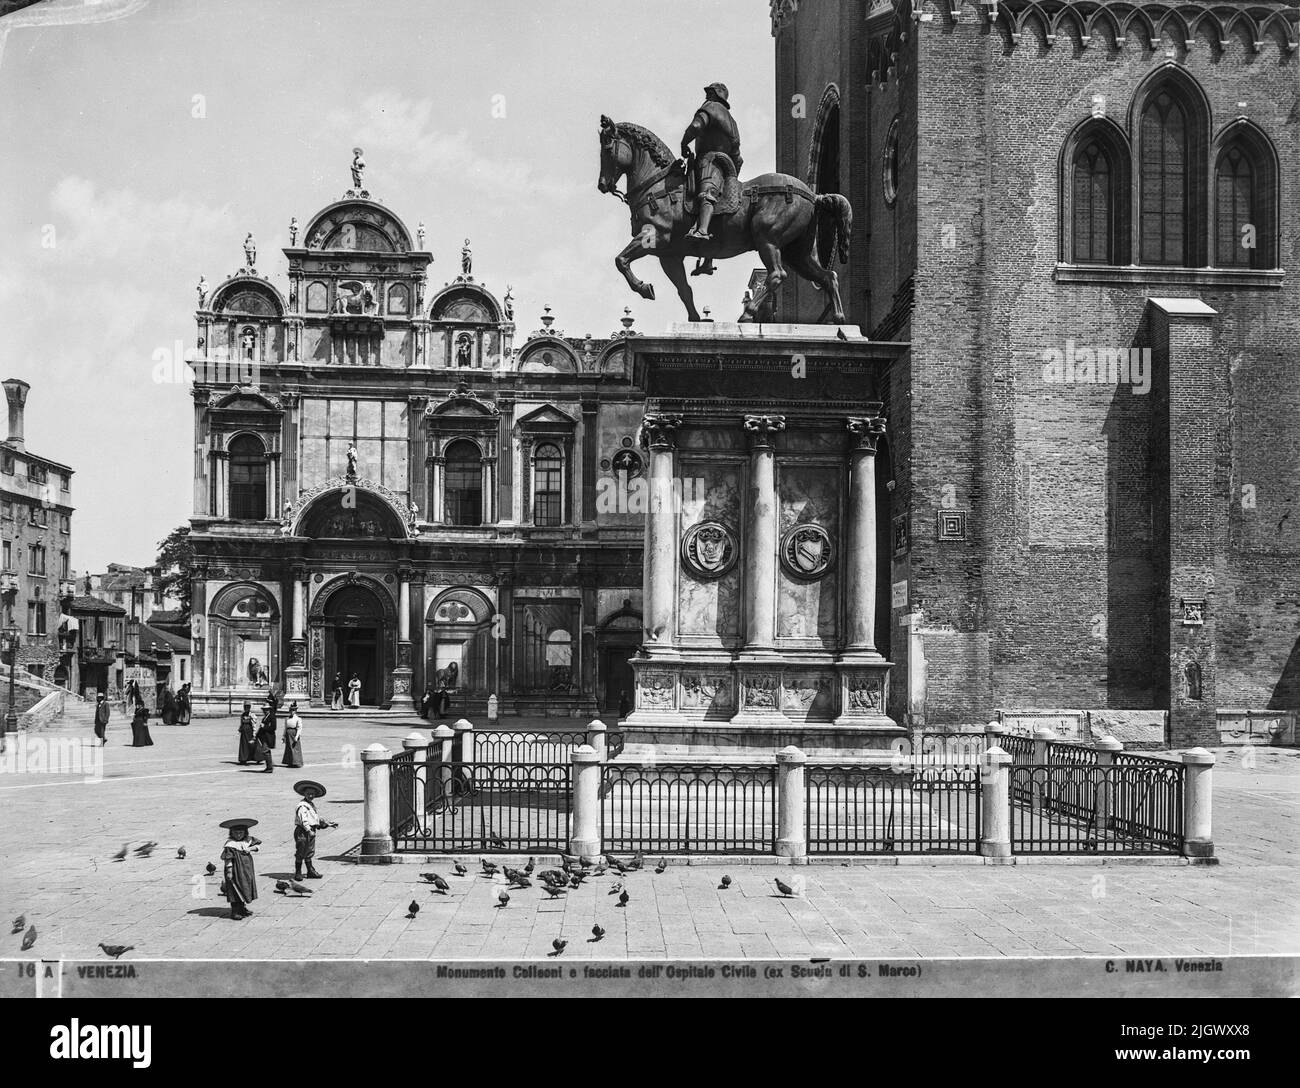 A view of SS. Giovanni e Paolo square,with the actual hospital of Venice and the statue of Colleoni, made by Carlo Naya between 1868 and 1882. The historical archive of Naya-Bohm is an archive of 25000 glass plates, now digitalized, of pictures of Venice from 1868 until 1882 (Carlo Naya), and then until 1950 (Bohm). Stock Photo